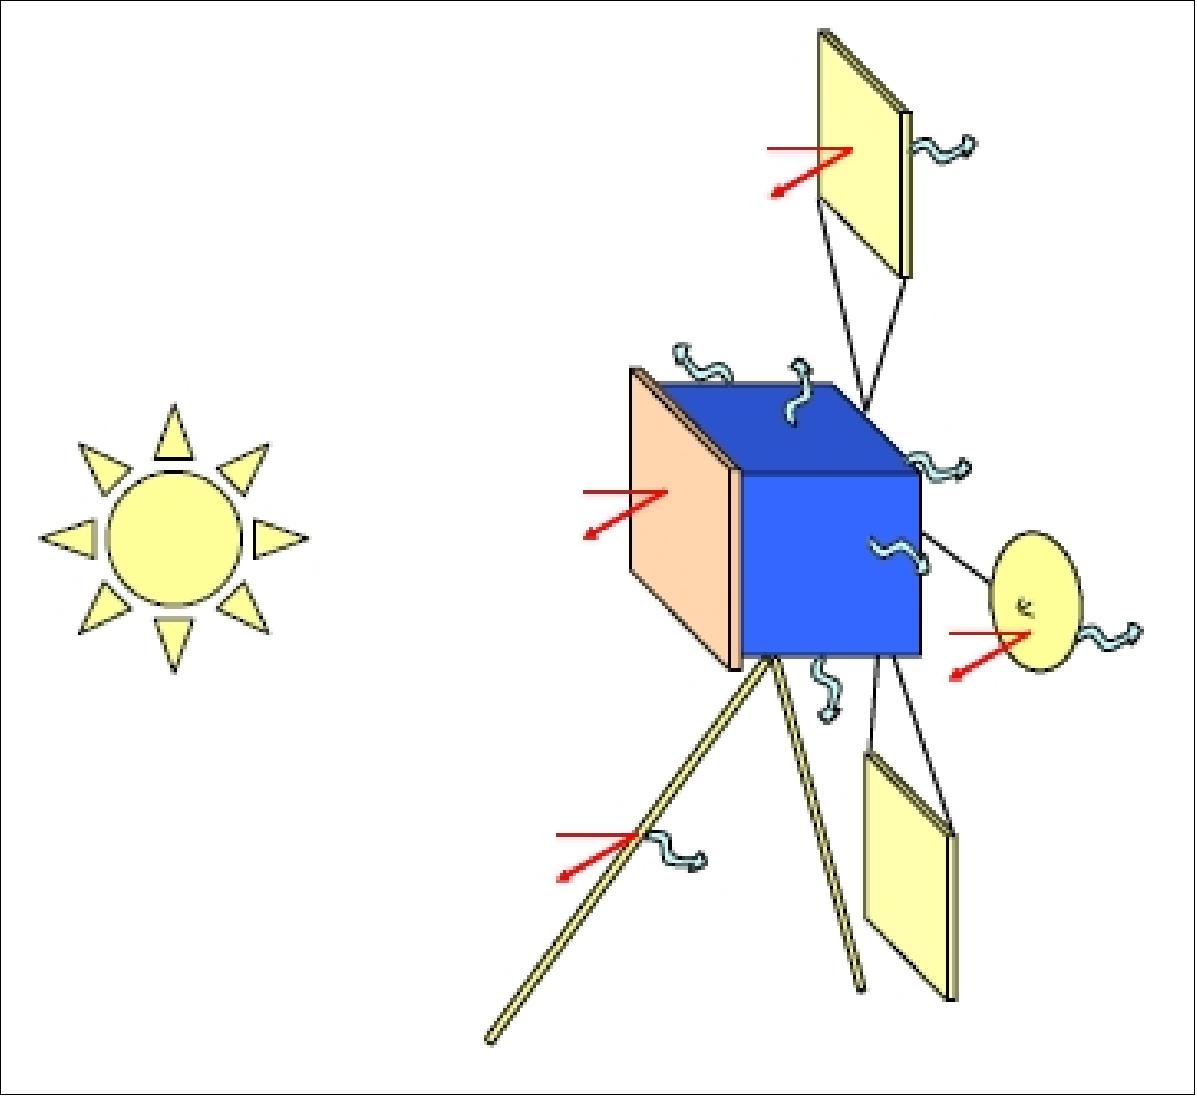 Figure 8: Schematic of thermal architecture (image credit: EADS Astrium)